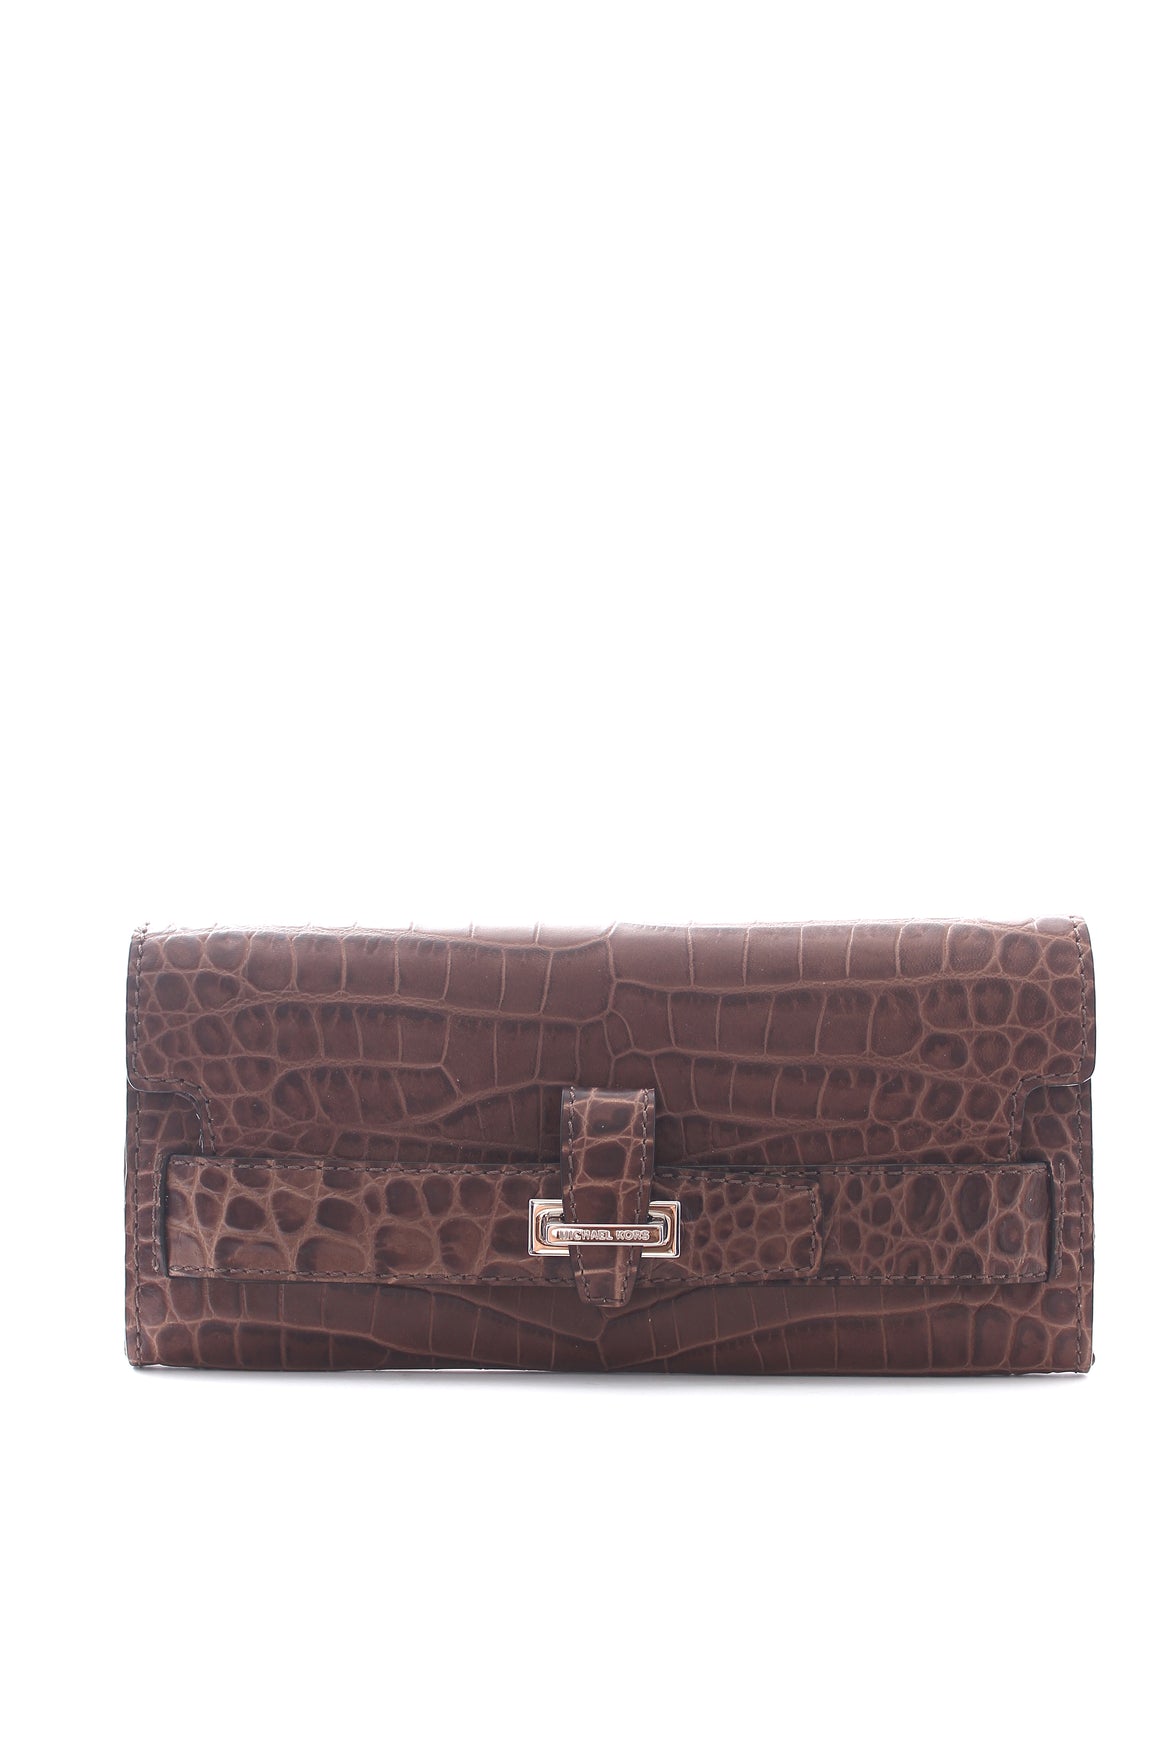 Michael Kors Collection Croc-Embossed Leather Clutch Bag